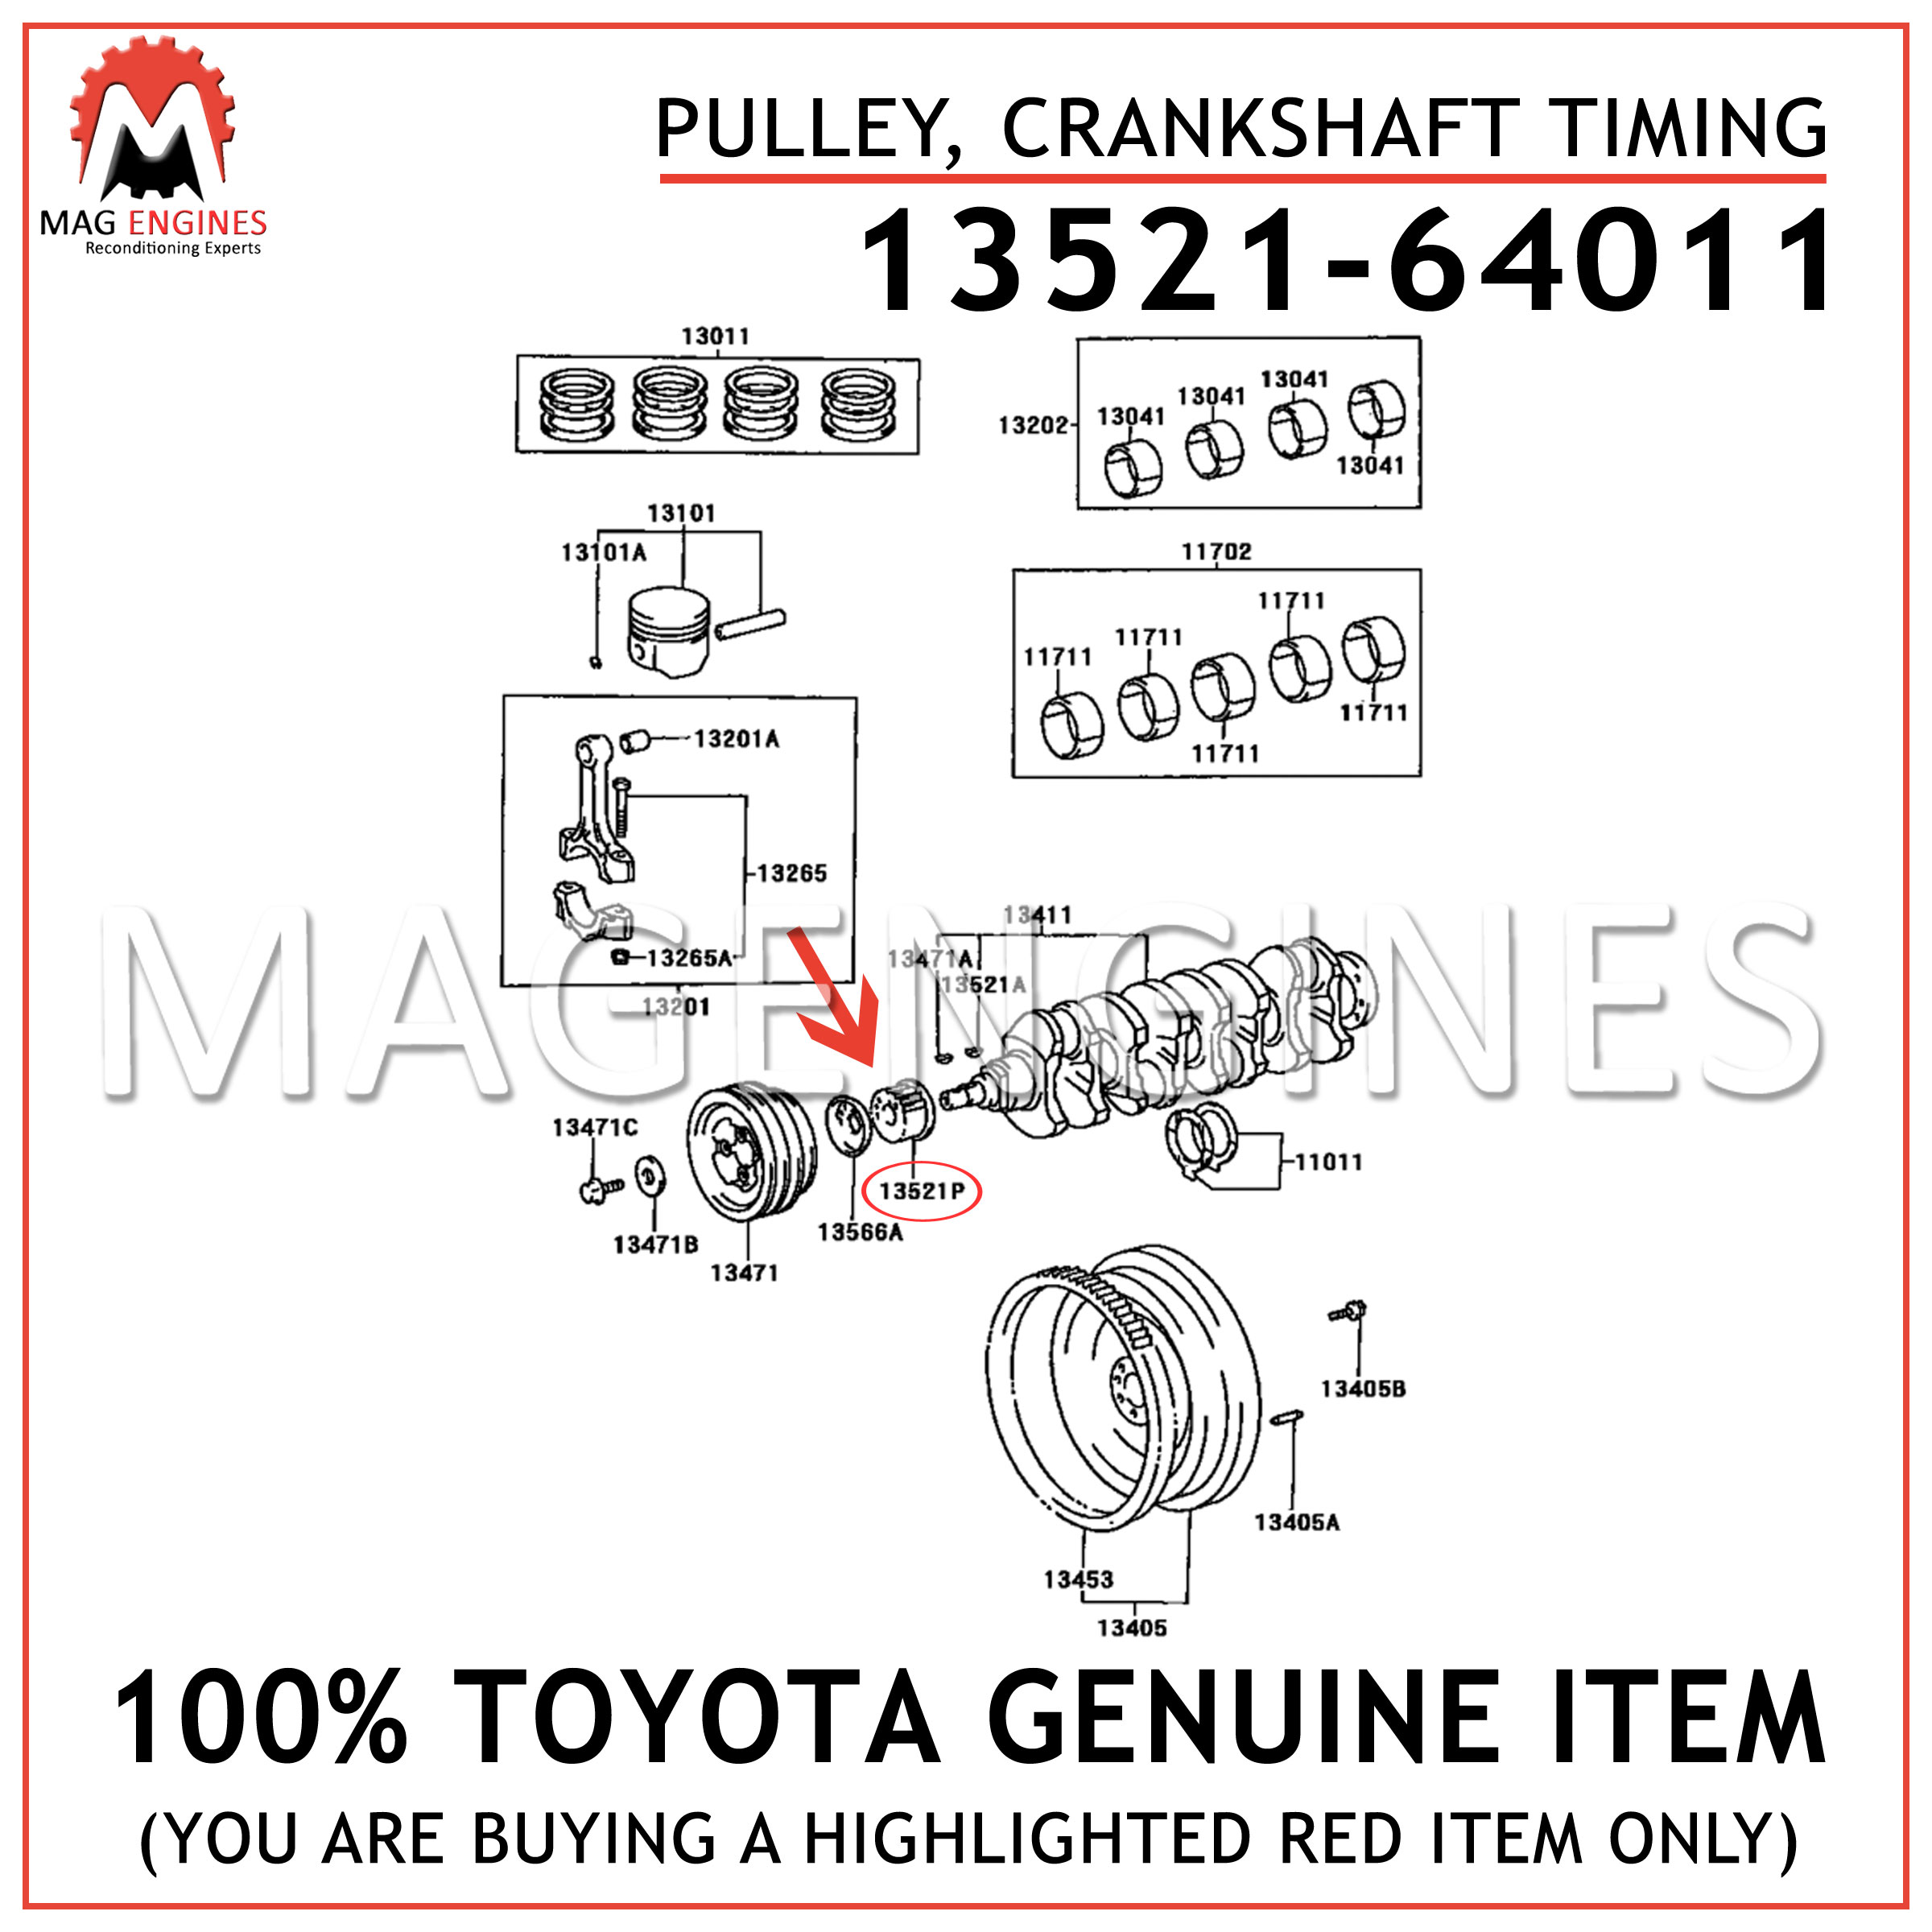 New Genuine OEM Part camshaft timing 1305164012 13051-64012 Toyota Pulley